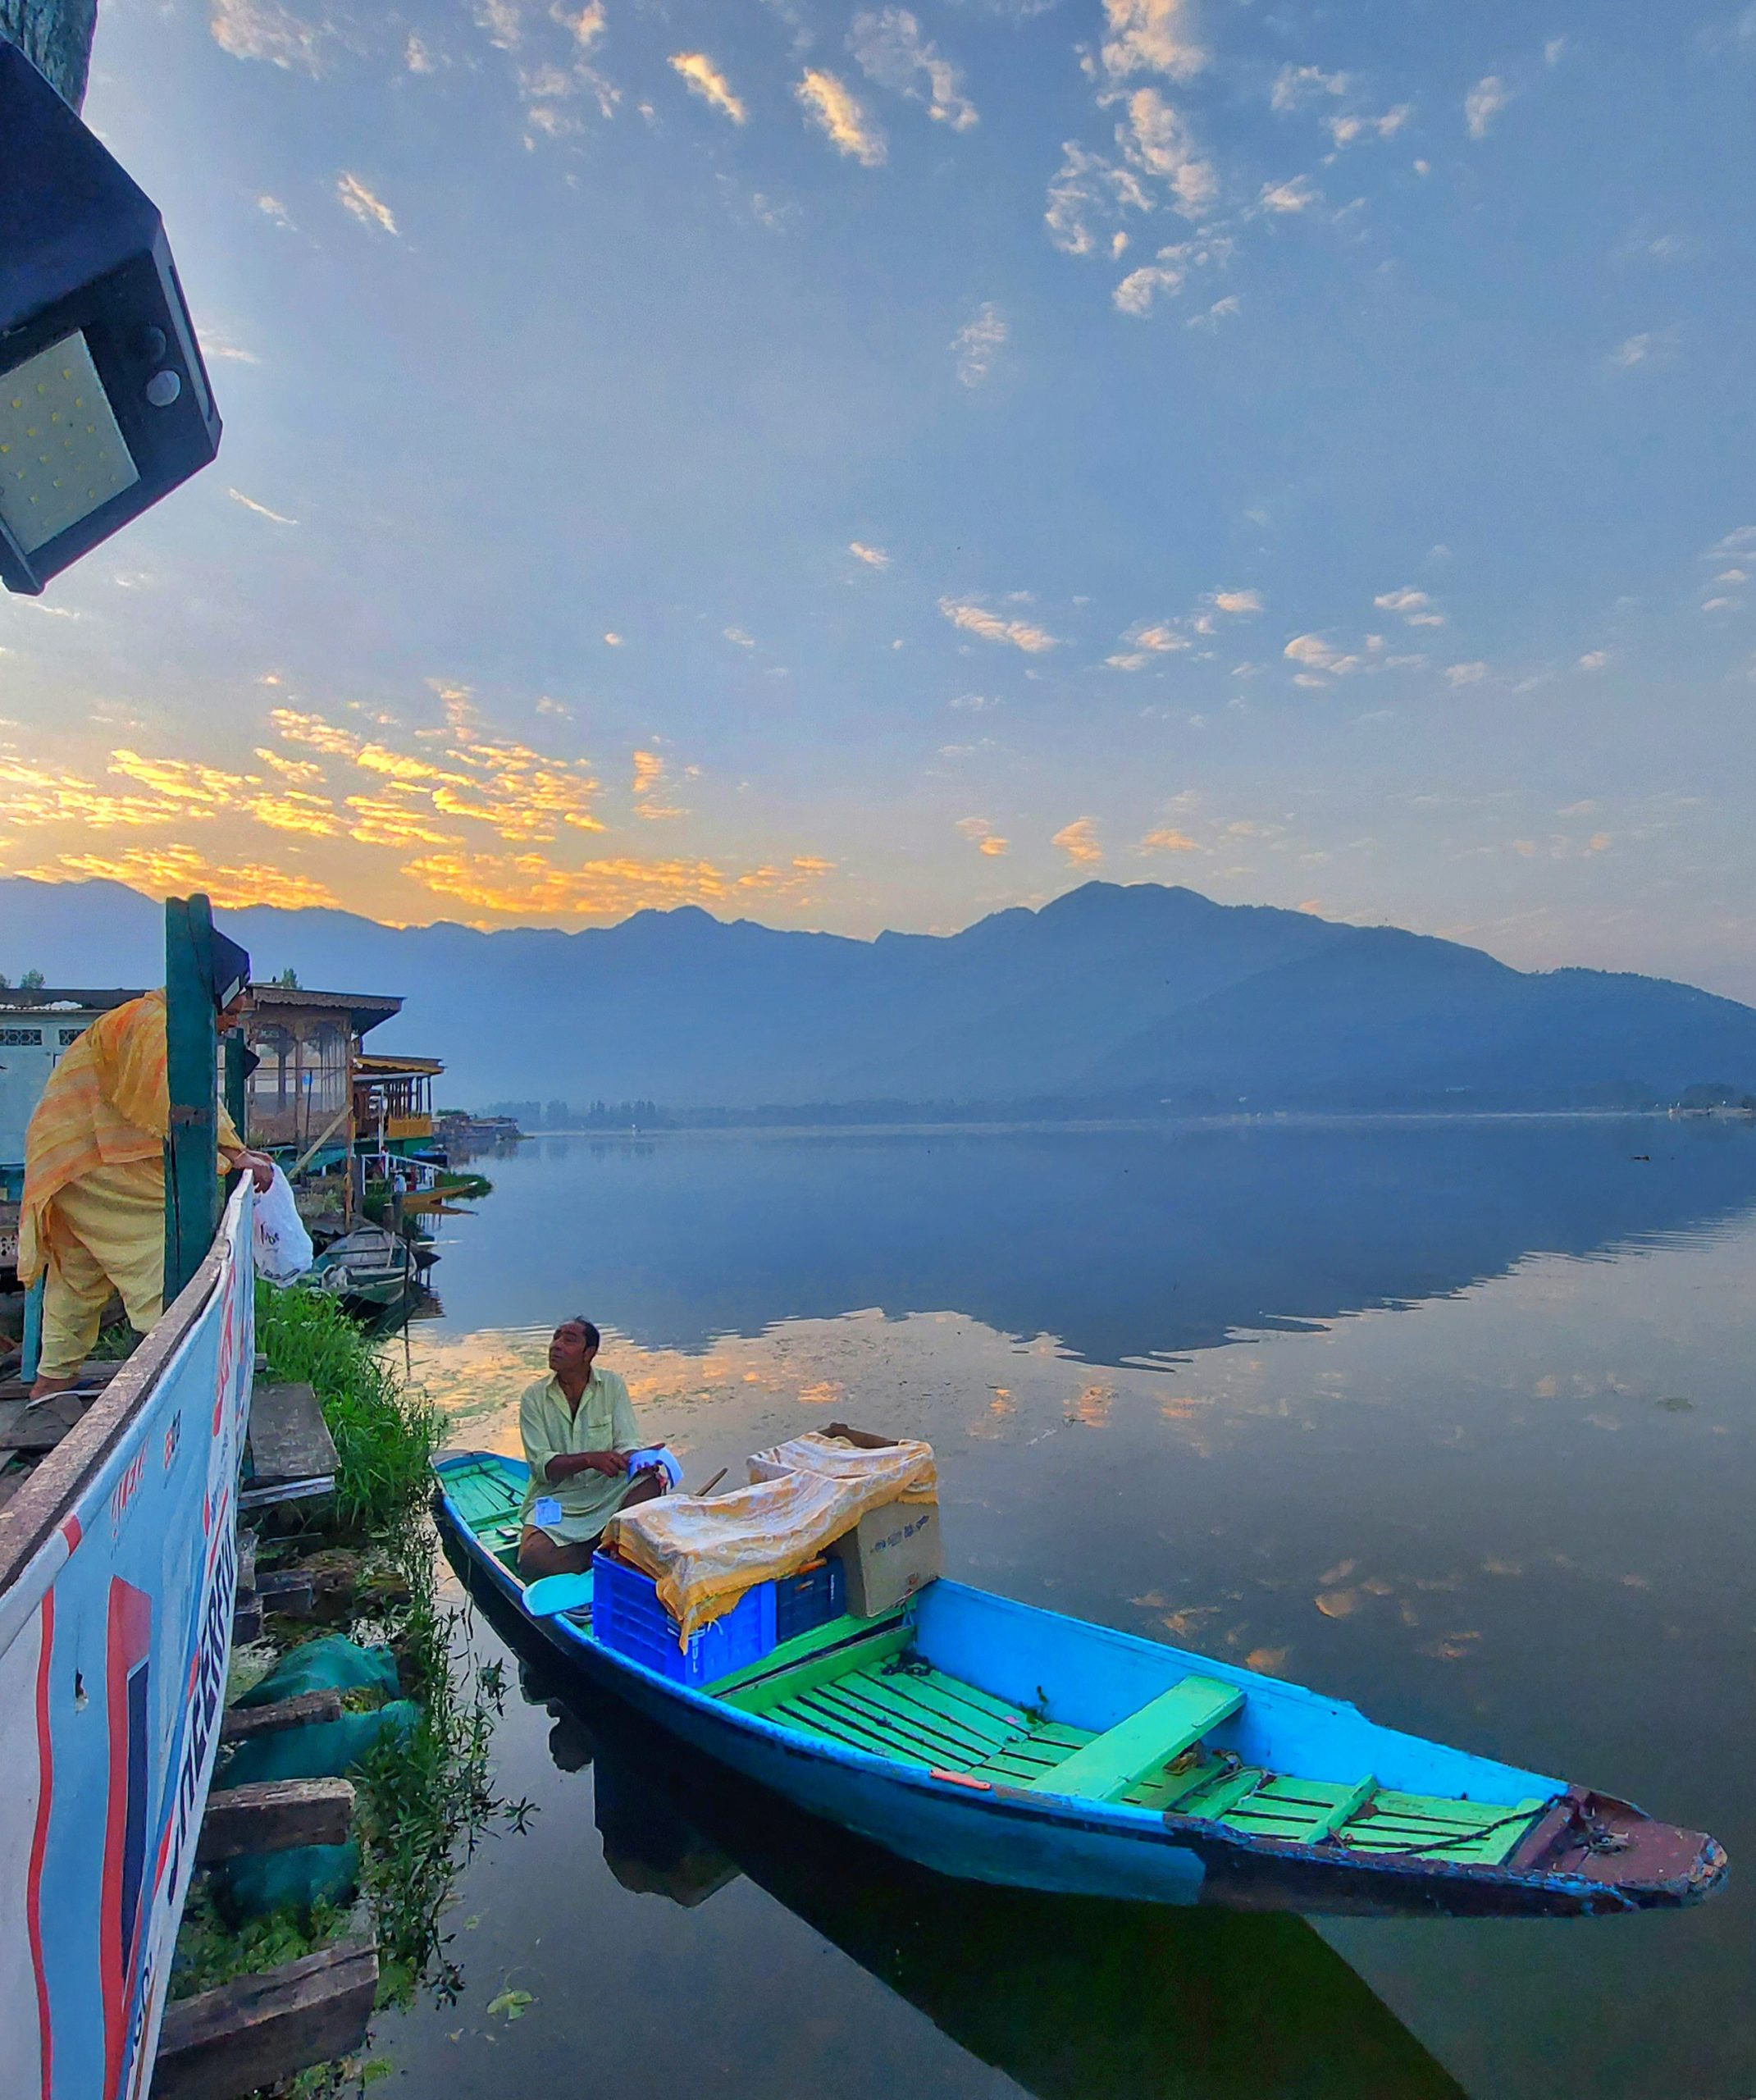 Things to remember before travelling to Kashmir